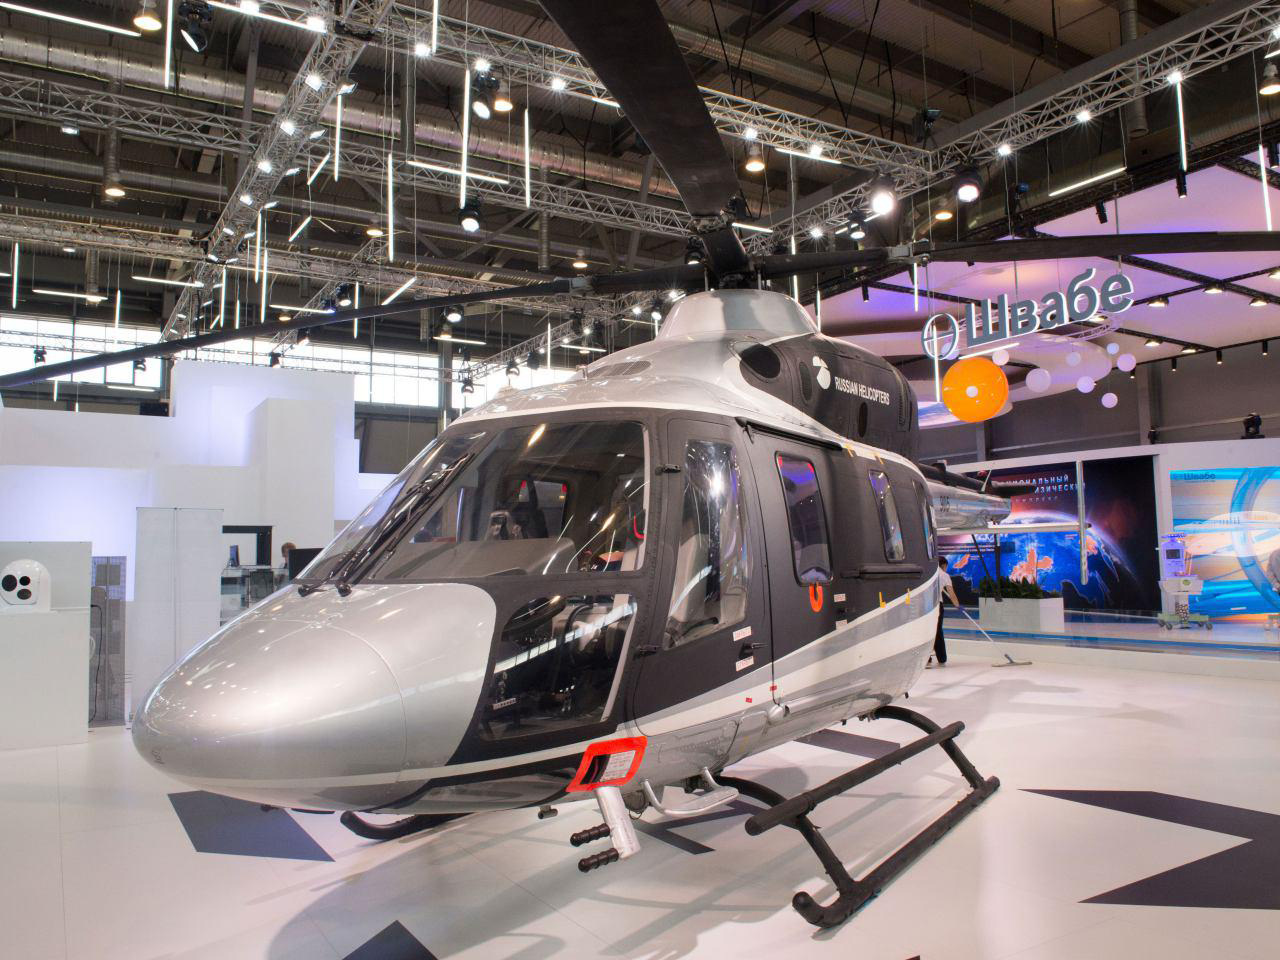 Russian Helicopters is taking part in the exhibition Innoprom-2015